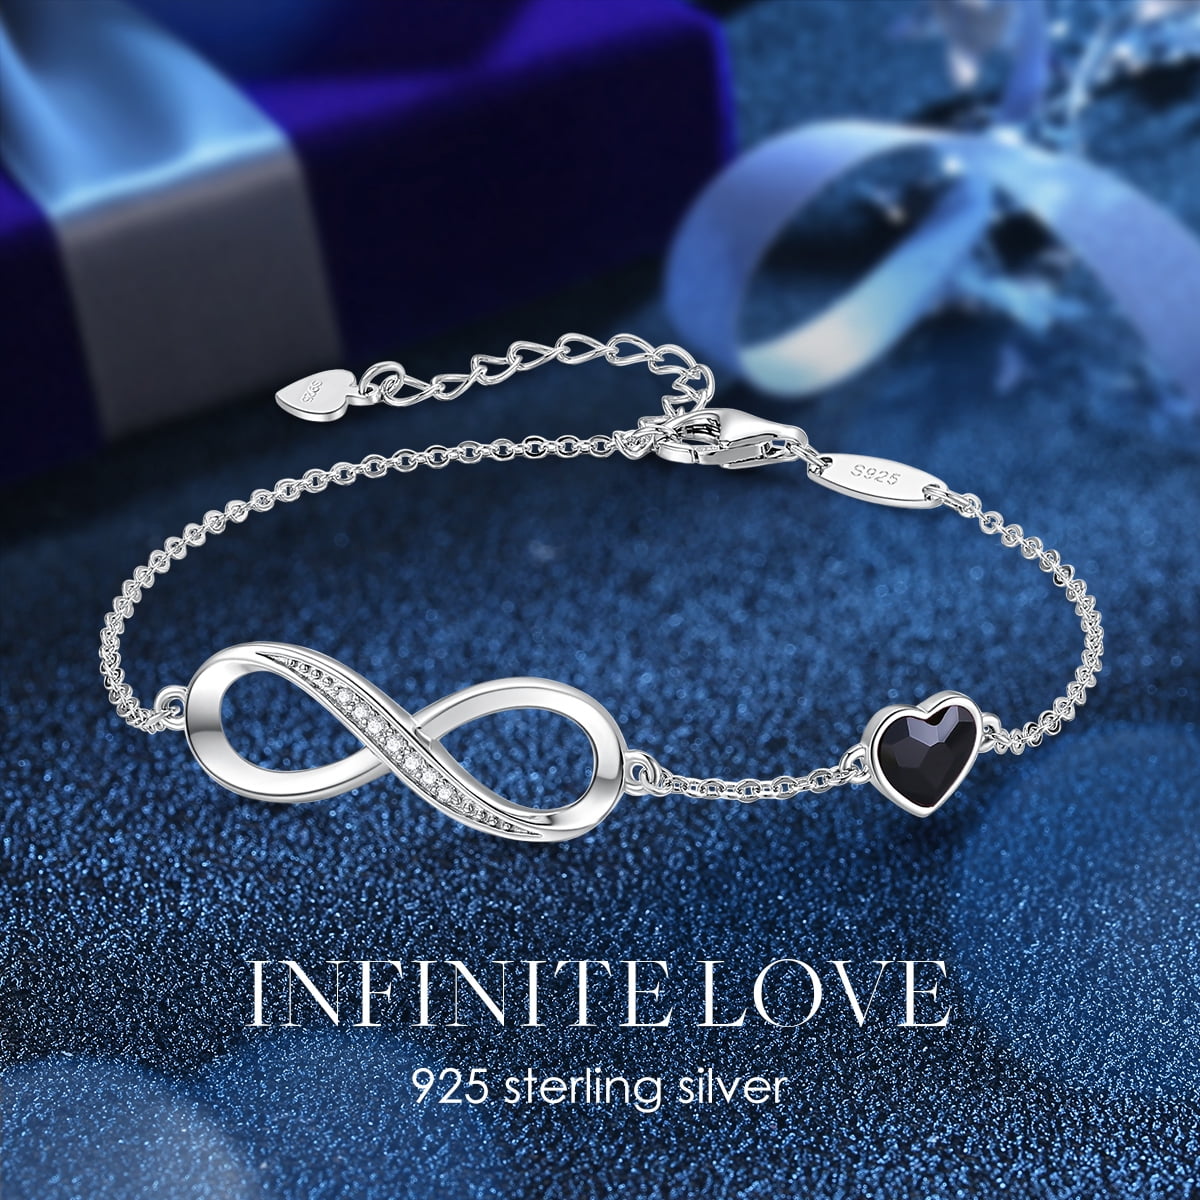 Best Anniversary Gift CDE 925 Women for Adjustable Jewelry Gift Fine Ideas Heart Bracelet Box Charm Packing Women for Symbol Sterling Infinity Silver